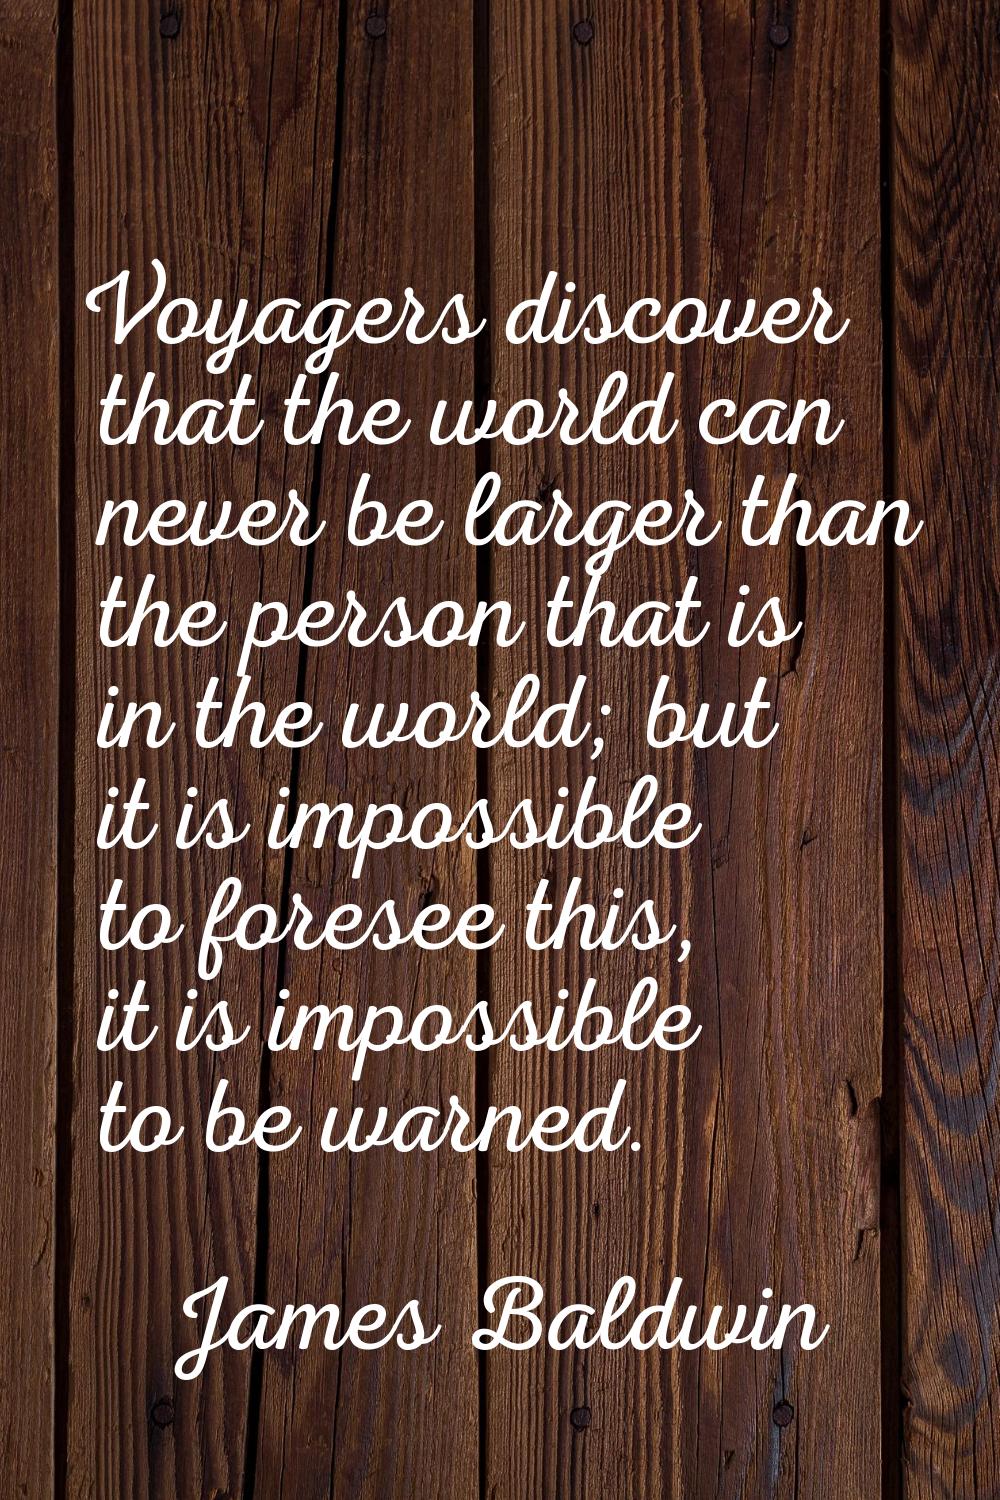 Voyagers discover that the world can never be larger than the person that is in the world; but it i